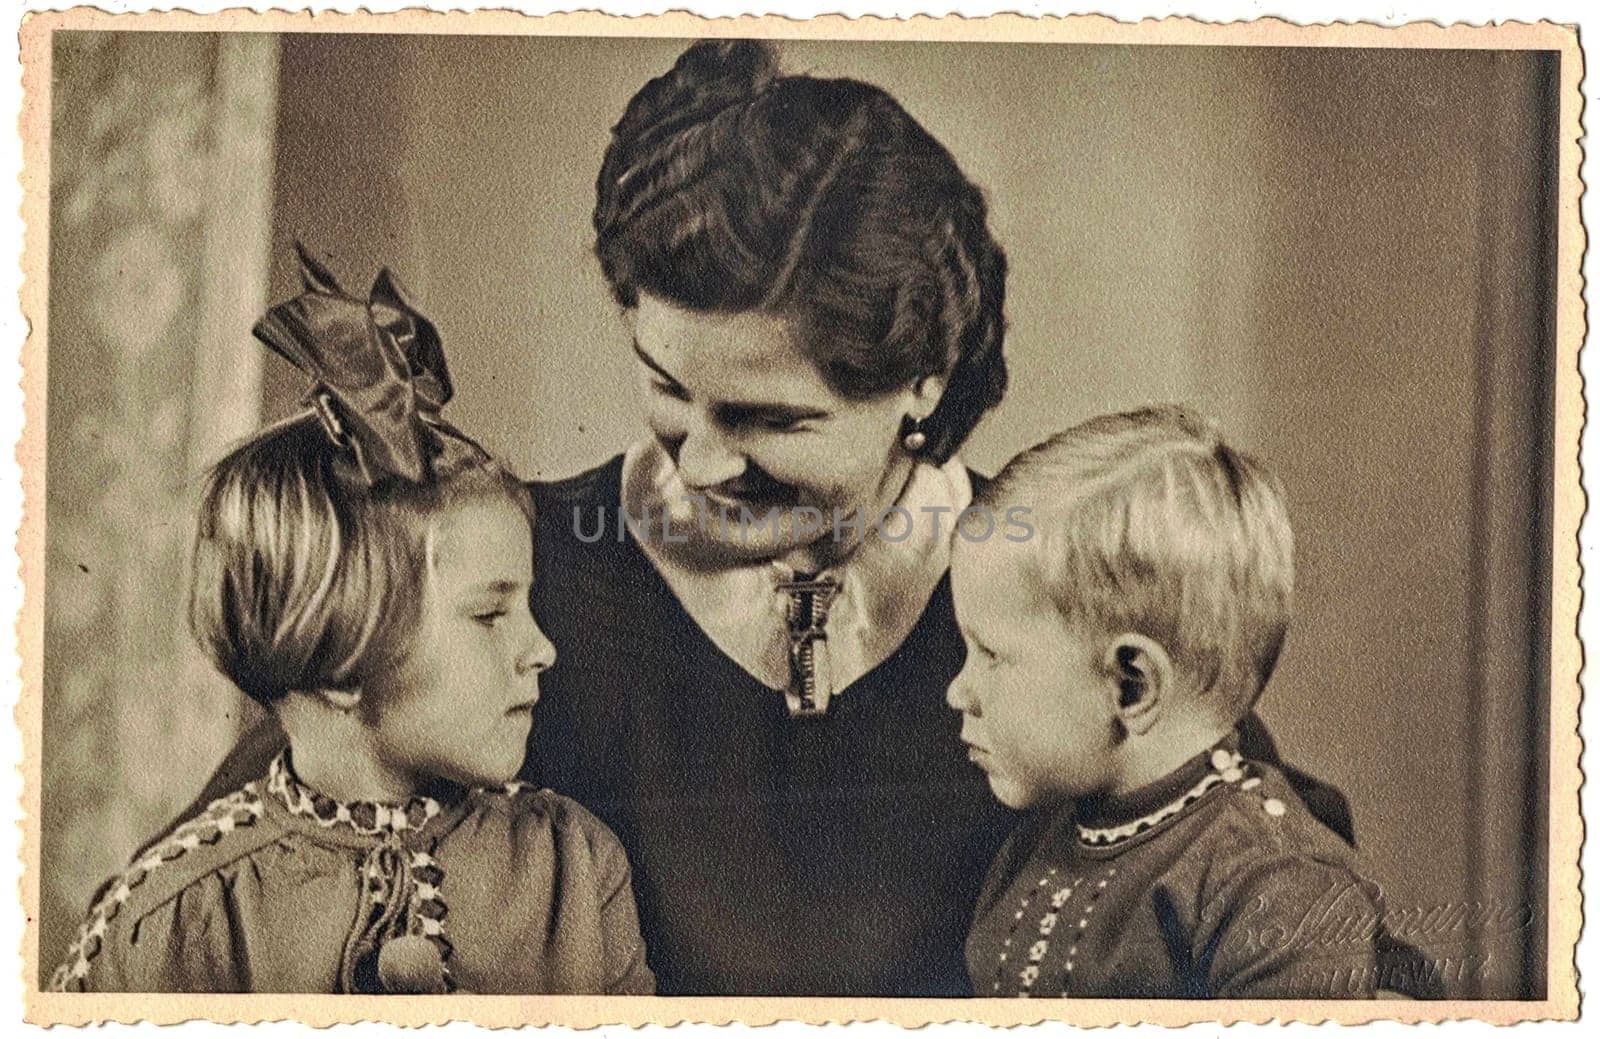 The vintage photo shows family photo, mum and children - girl and boy. Studio portrait by roman_nerud